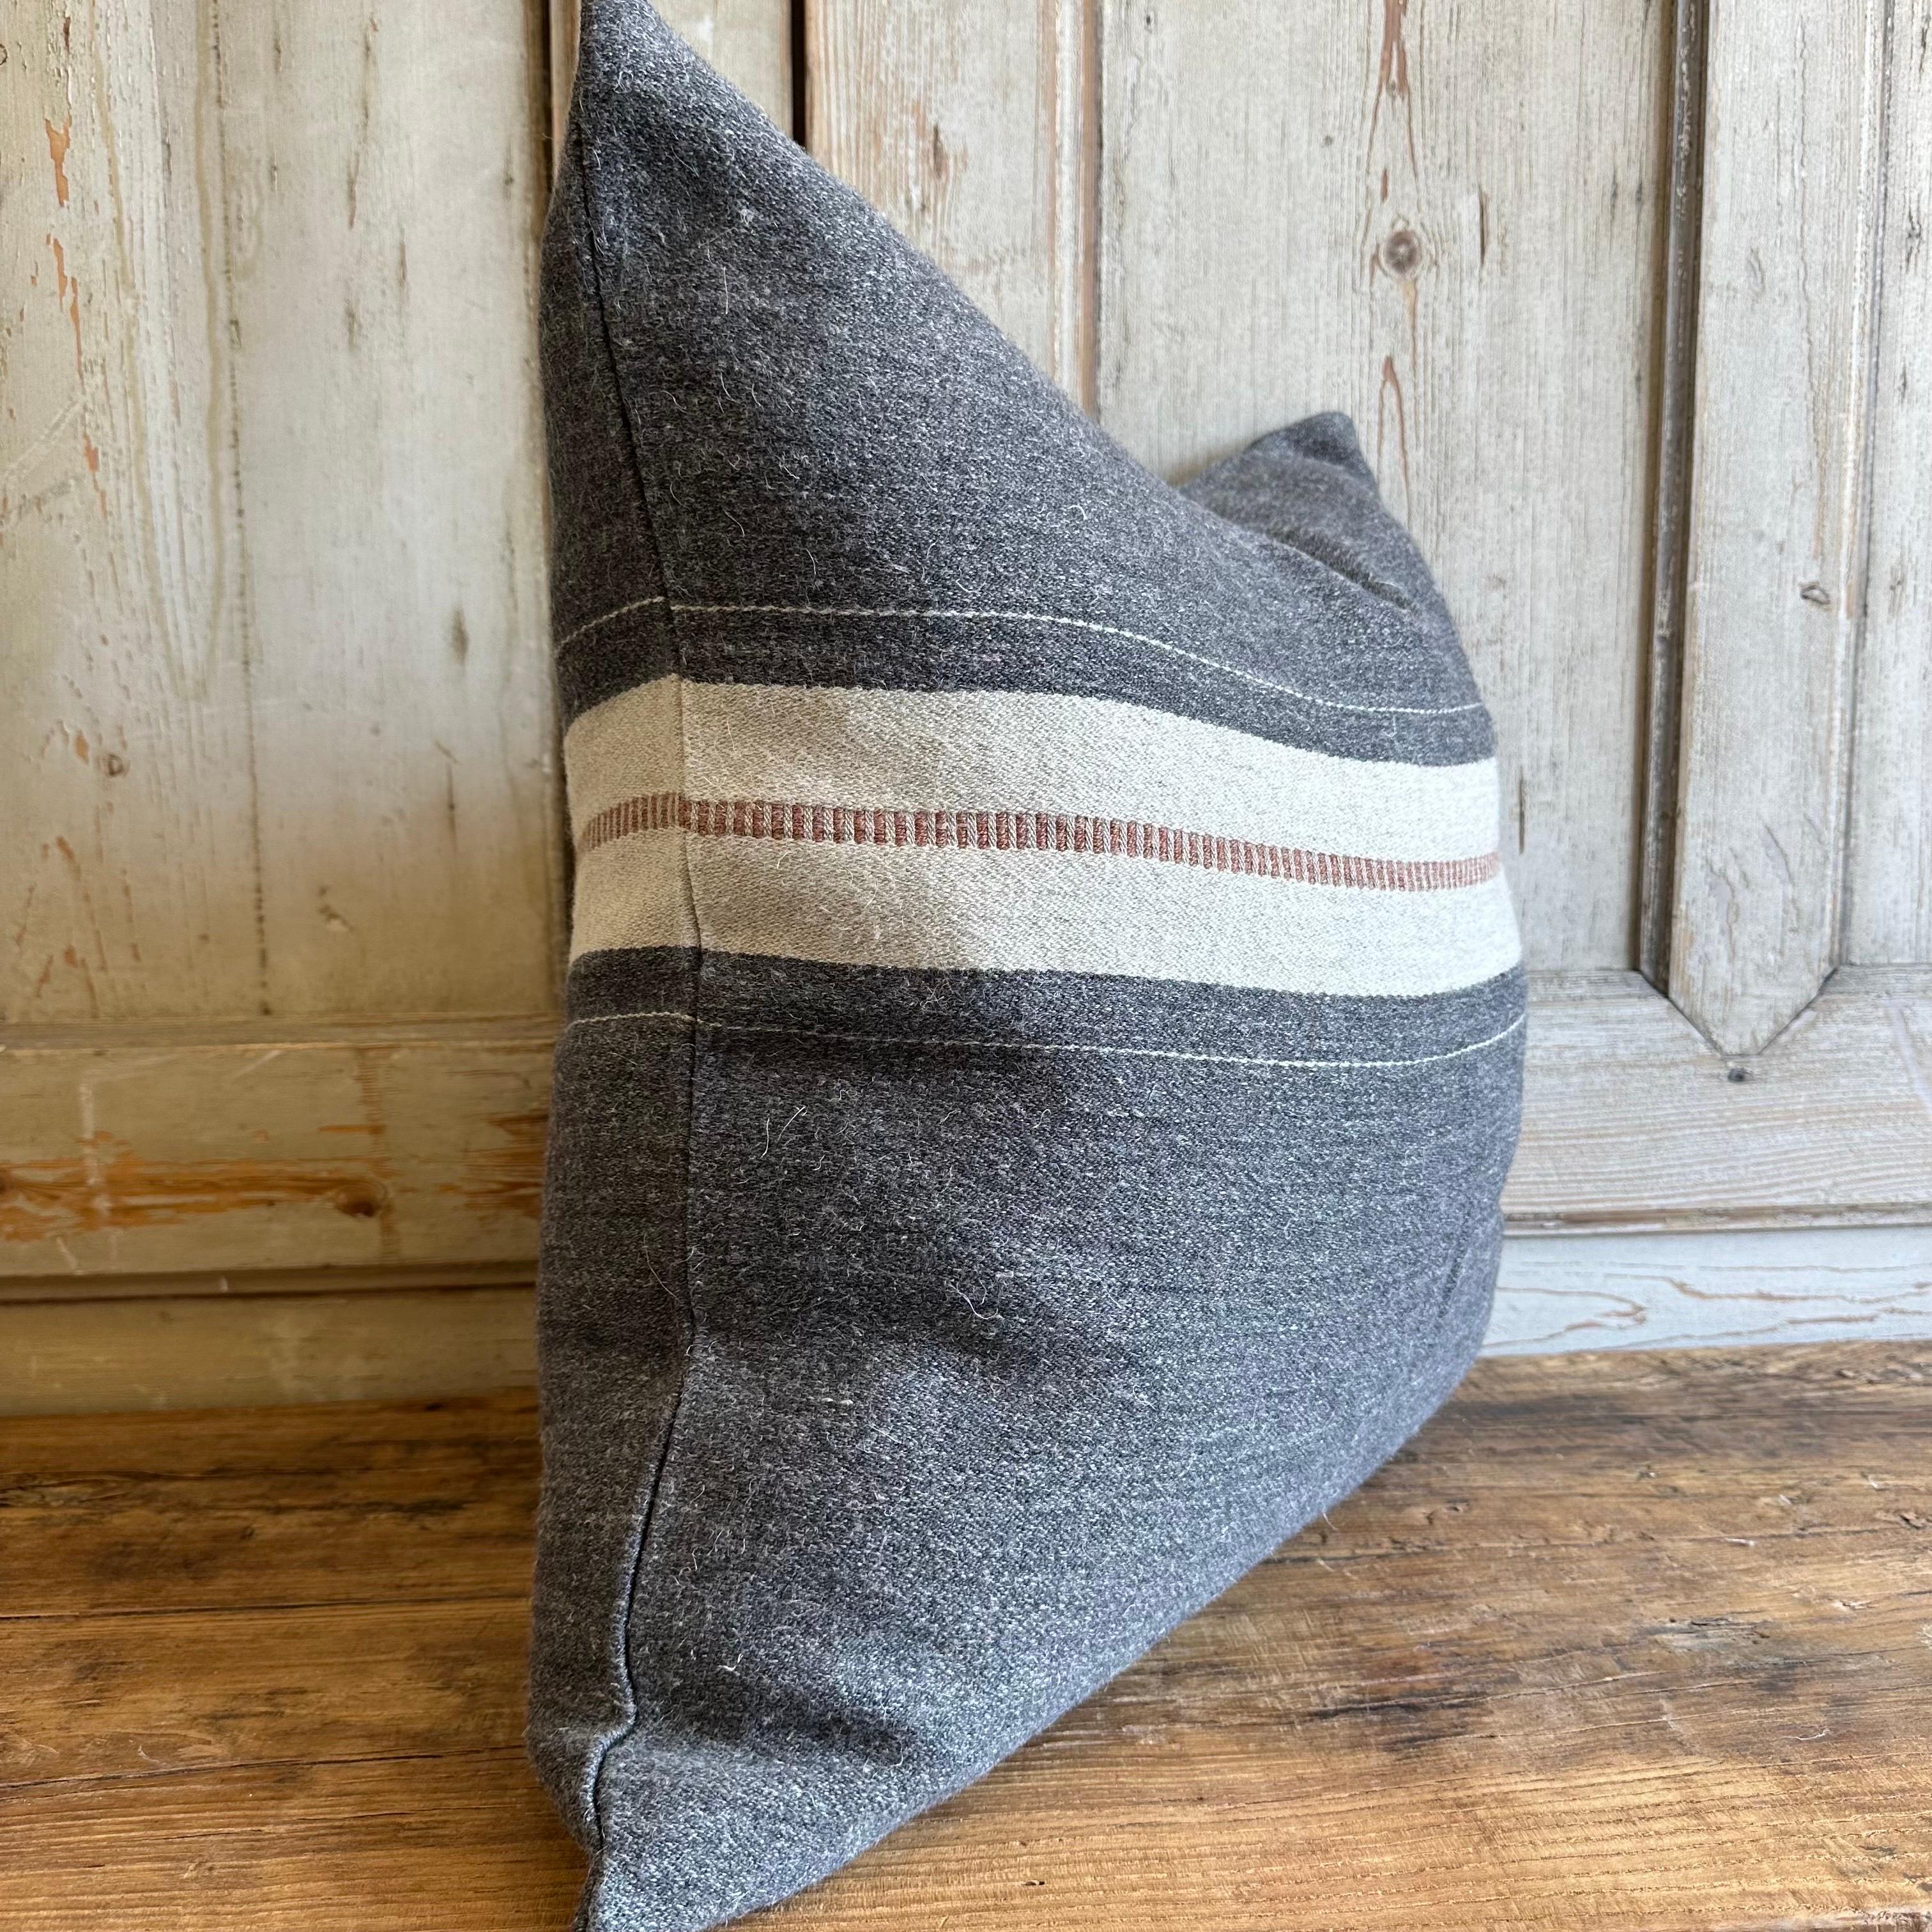 The Luc pillow in a warm gray ground finished with bone and copper stripes at each end. Zipper Closure.
Available in a throw as well.
70% linen - 30% wool.
Washed finish.
18 oz/yd² - 610 g/m132.
Dry Cleaning Recommended.
Down/Feather insert is